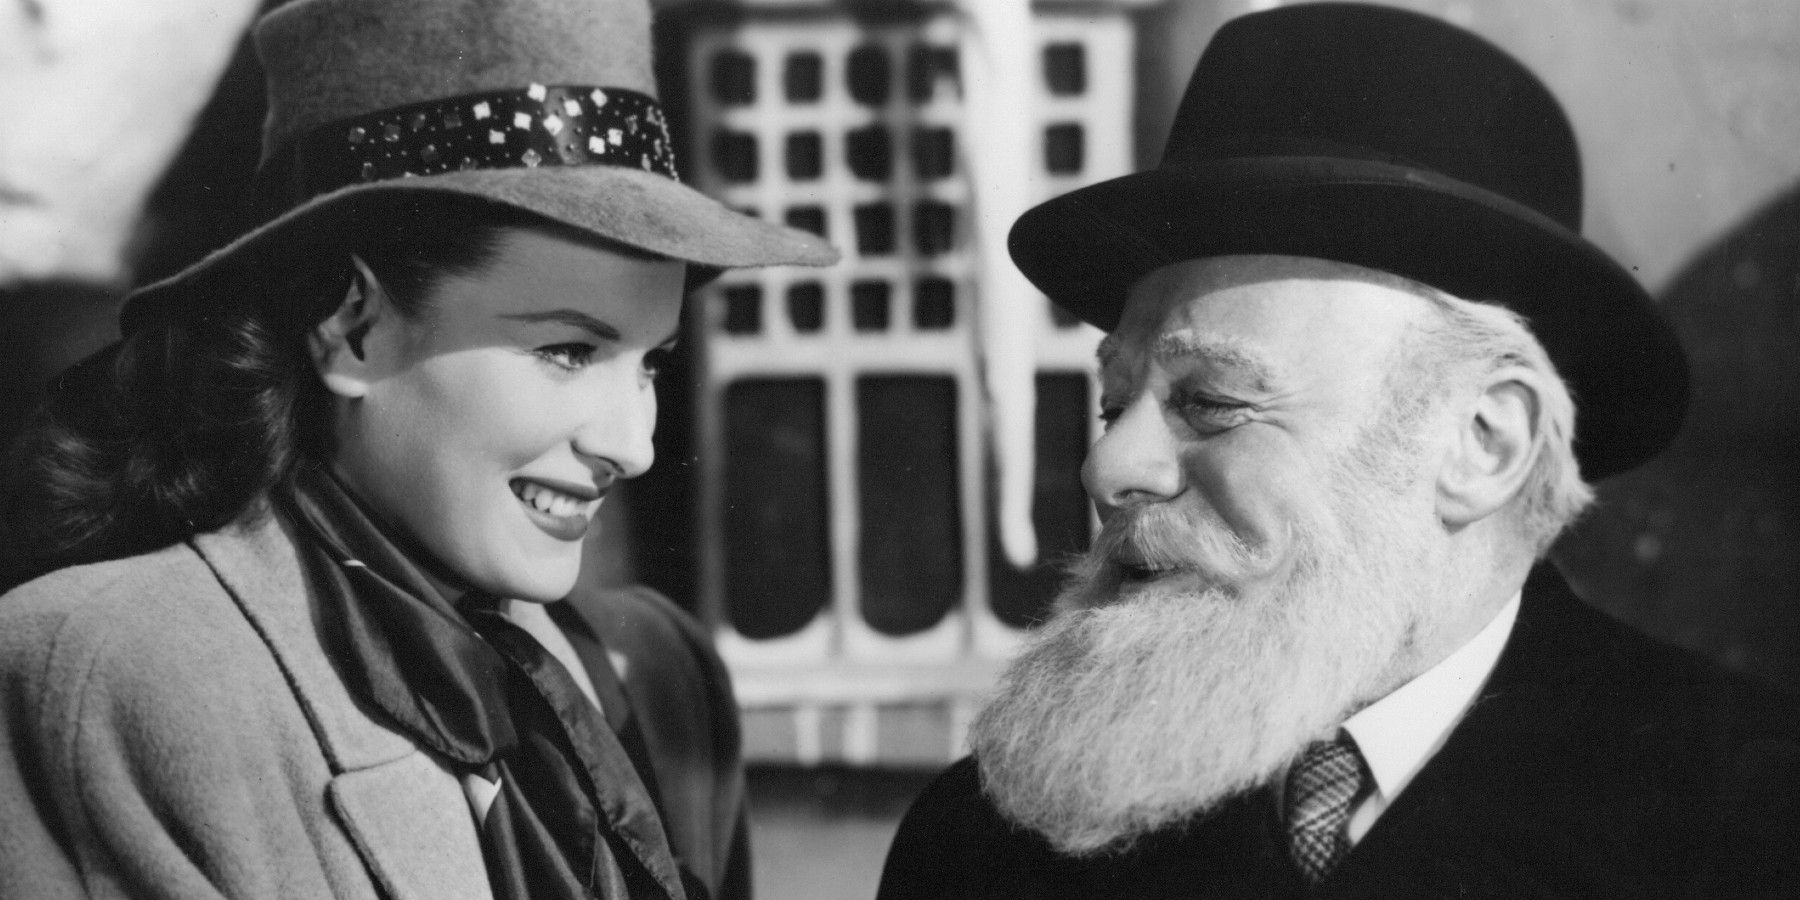 10 Heartwarming Miracle On 34th Street Quotes